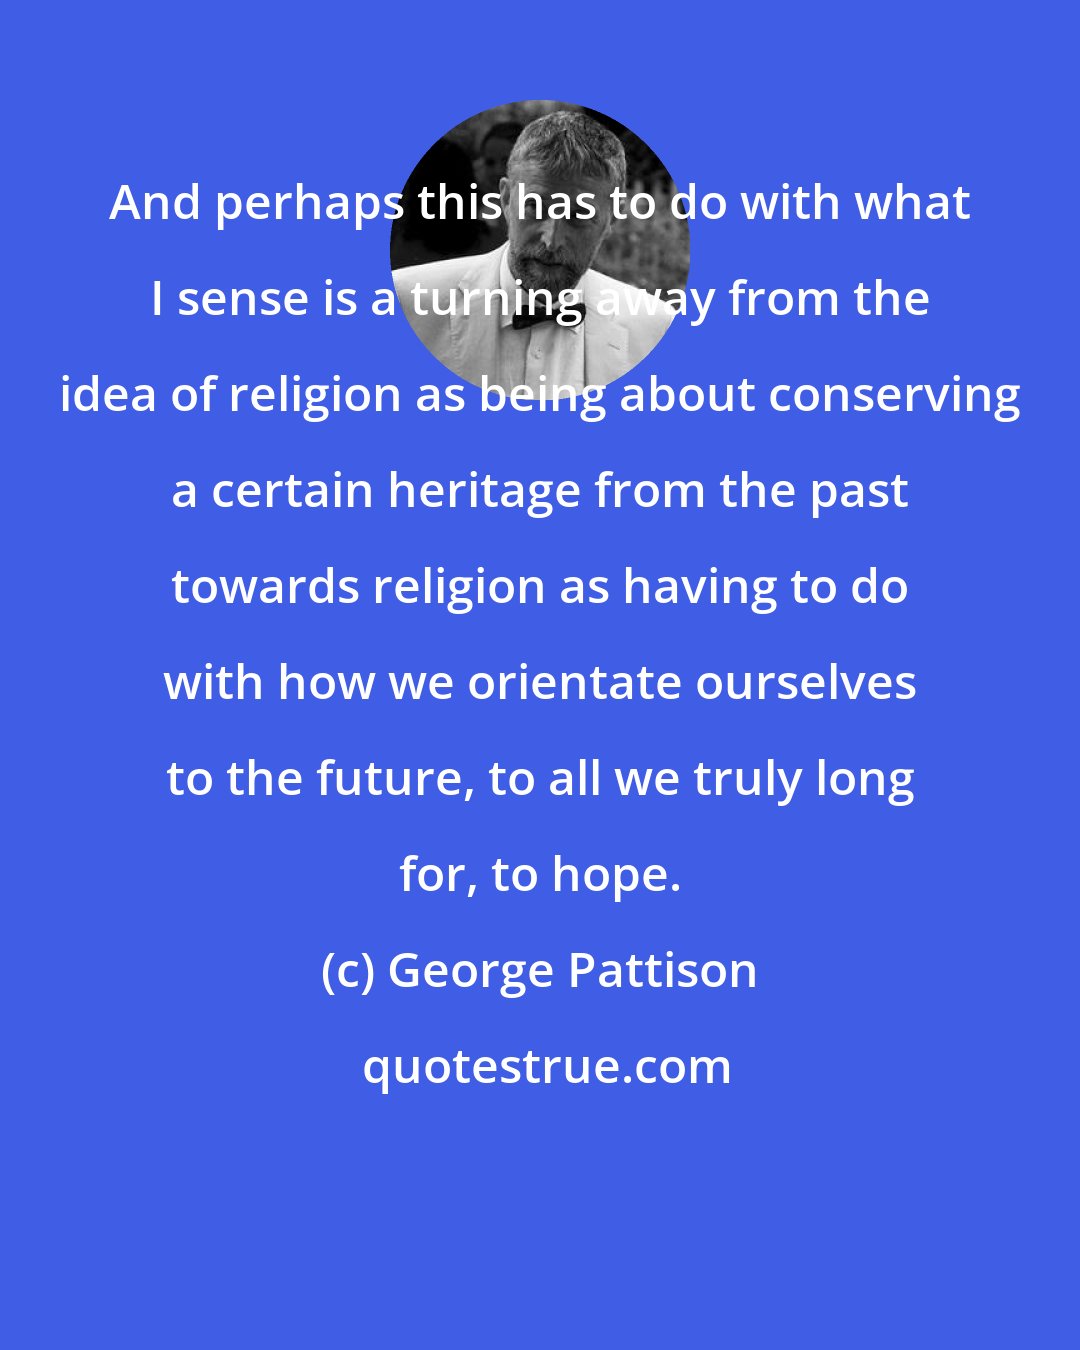 George Pattison: And perhaps this has to do with what I sense is a turning away from the idea of religion as being about conserving a certain heritage from the past towards religion as having to do with how we orientate ourselves to the future, to all we truly long for, to hope.